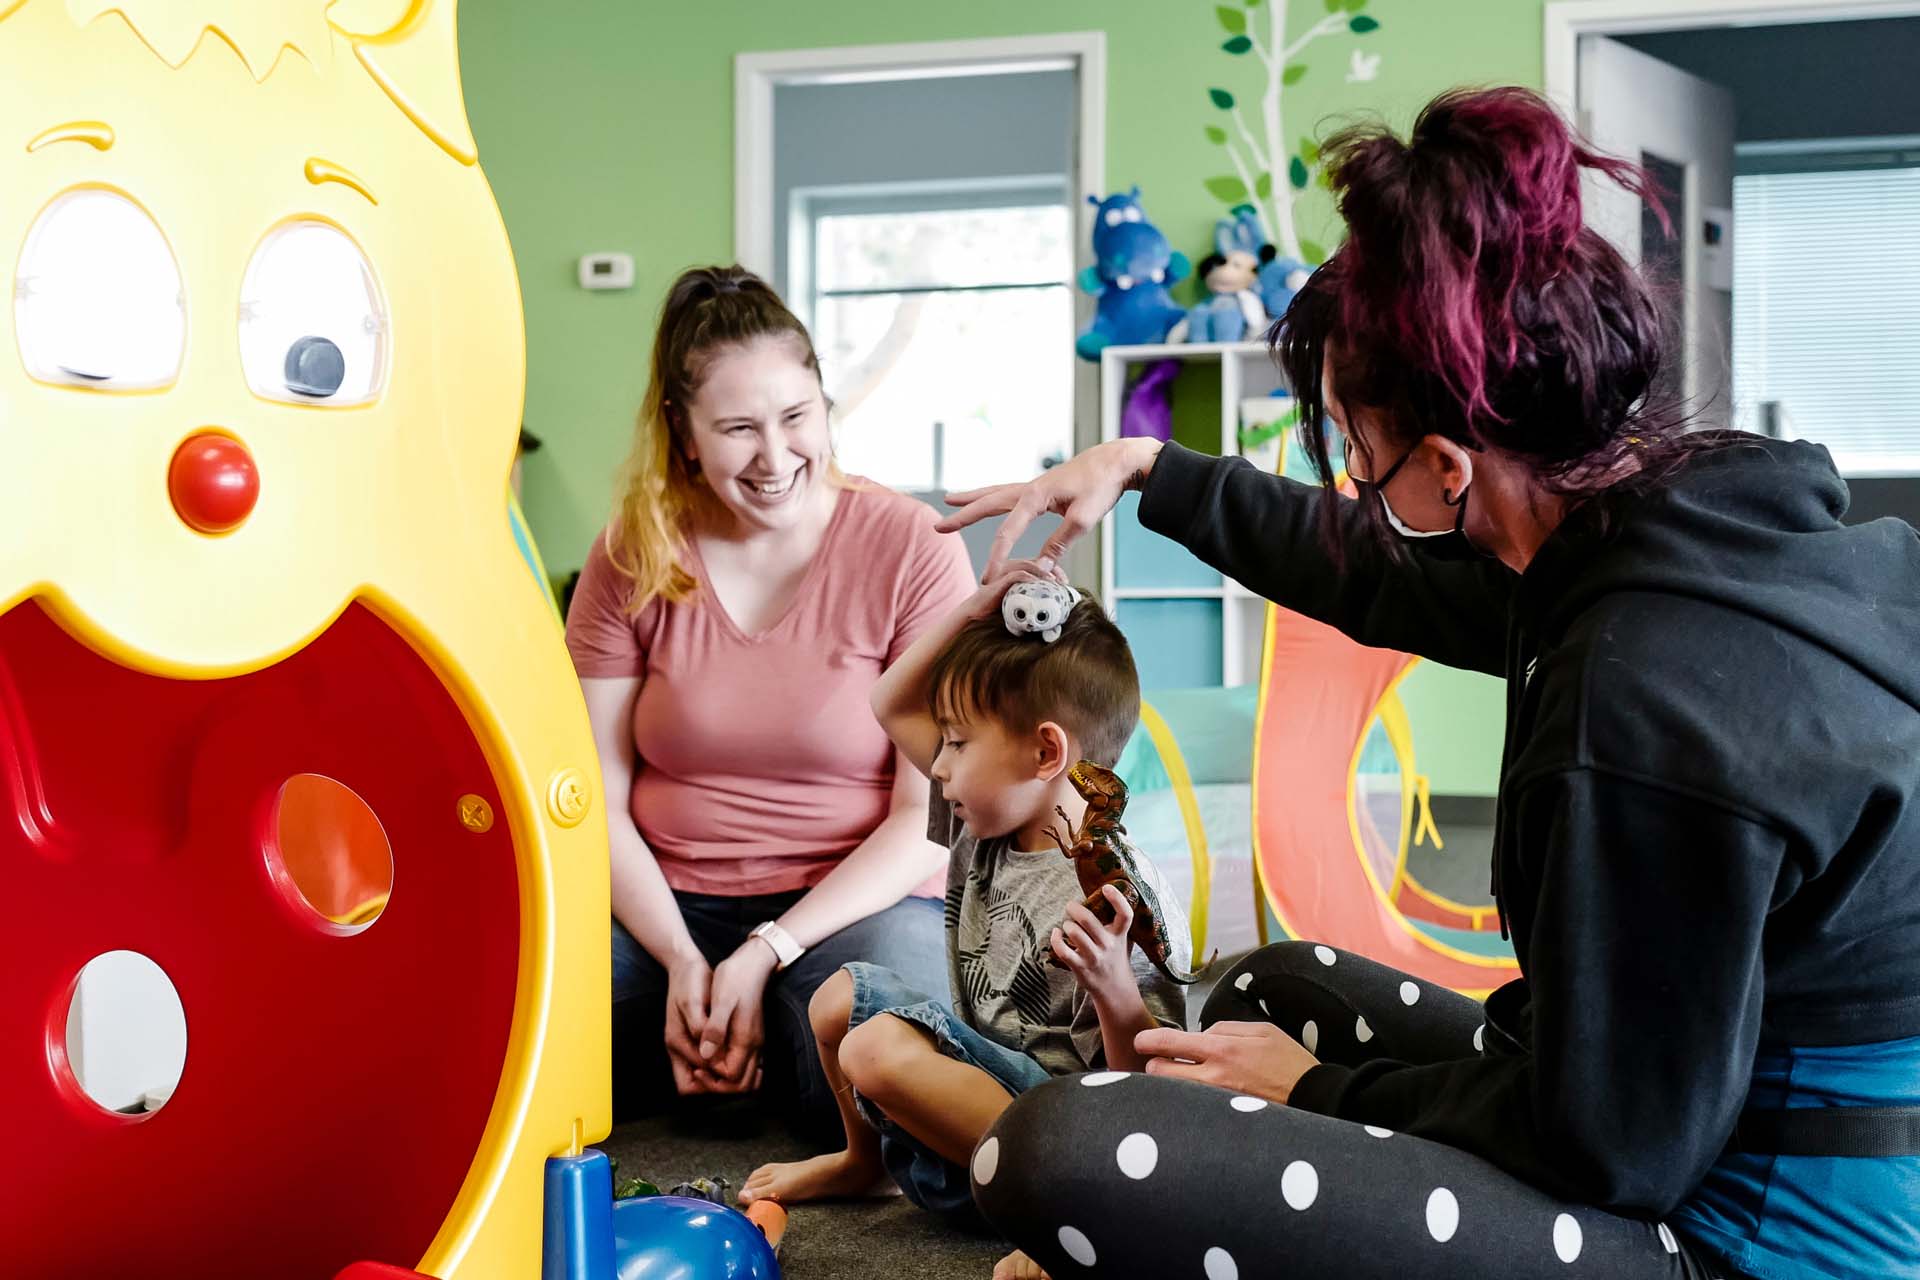 Functional Communication skills at InBloom Autism Services include requesting access to an item or activity, asking for help or a break, and requesting attention.